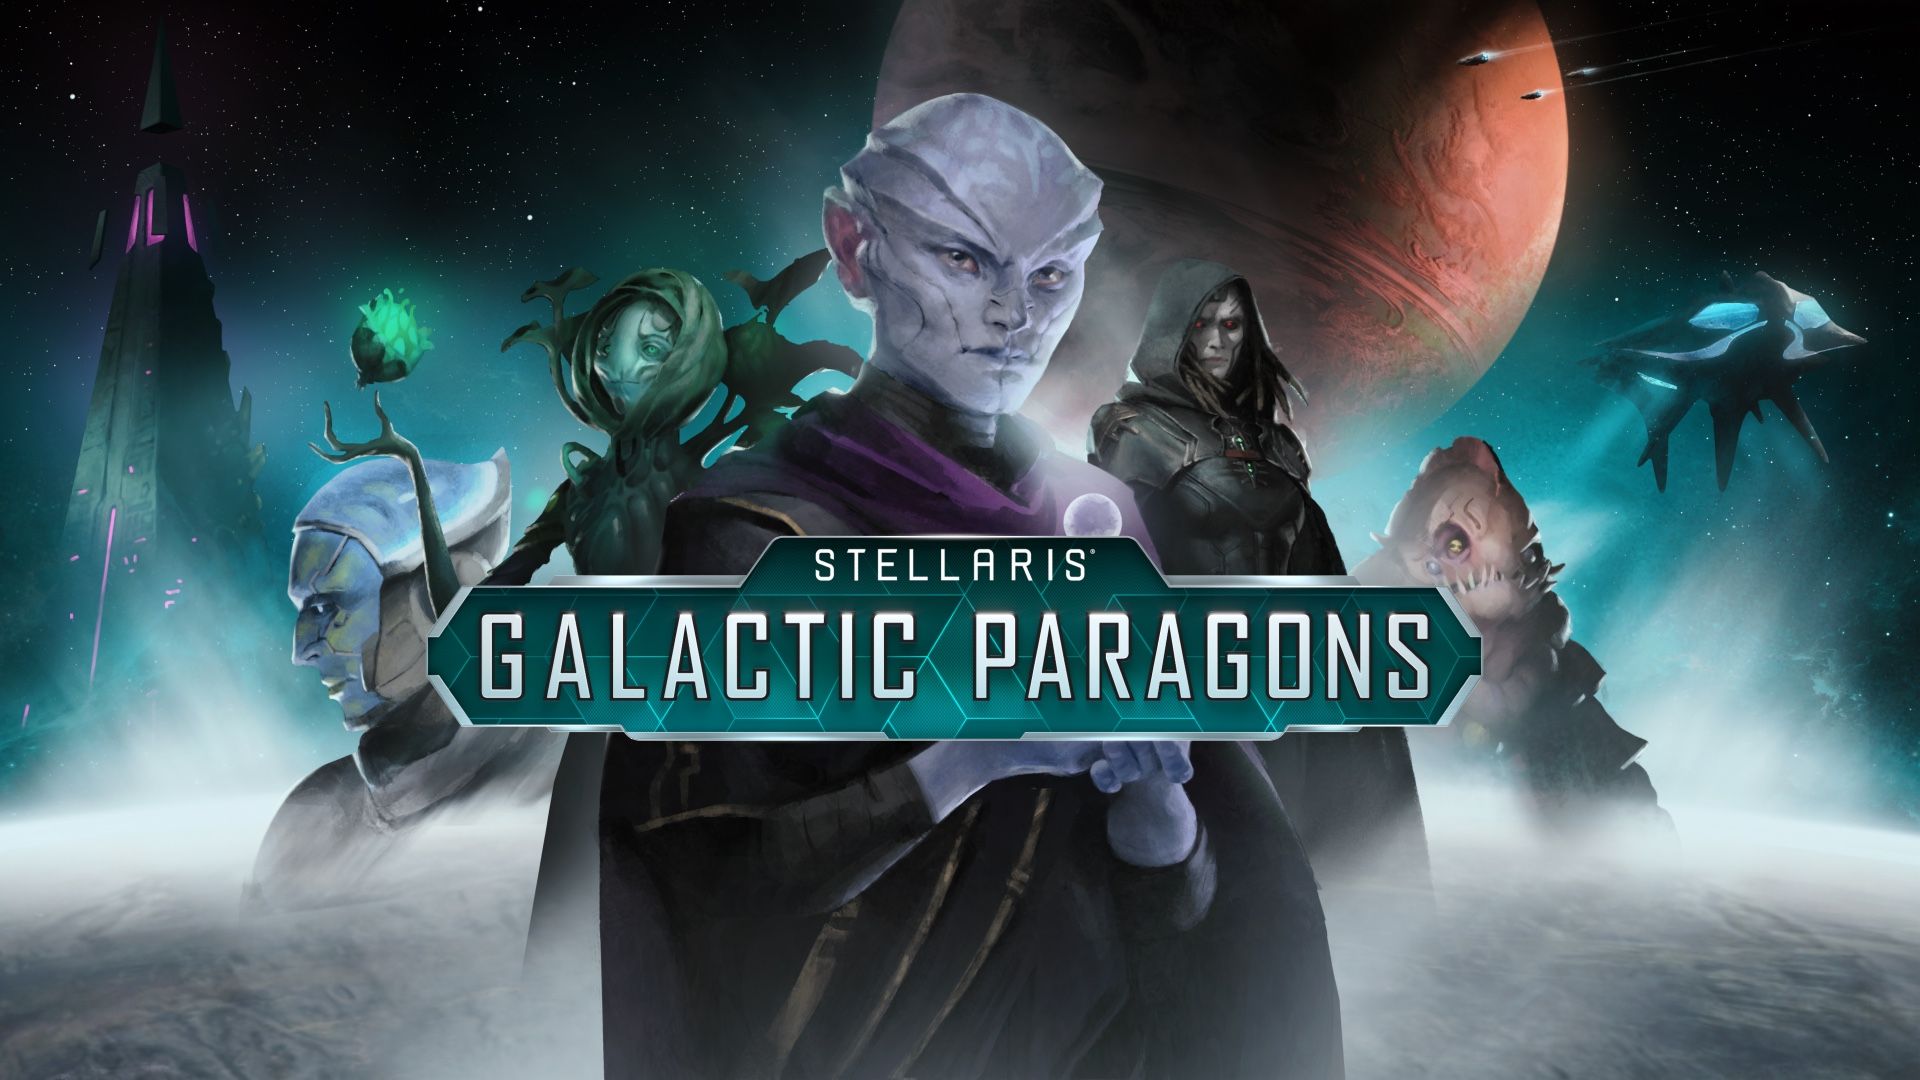 Key art for Stellaris: Galactic Paragons sowing a variety of alien leaders